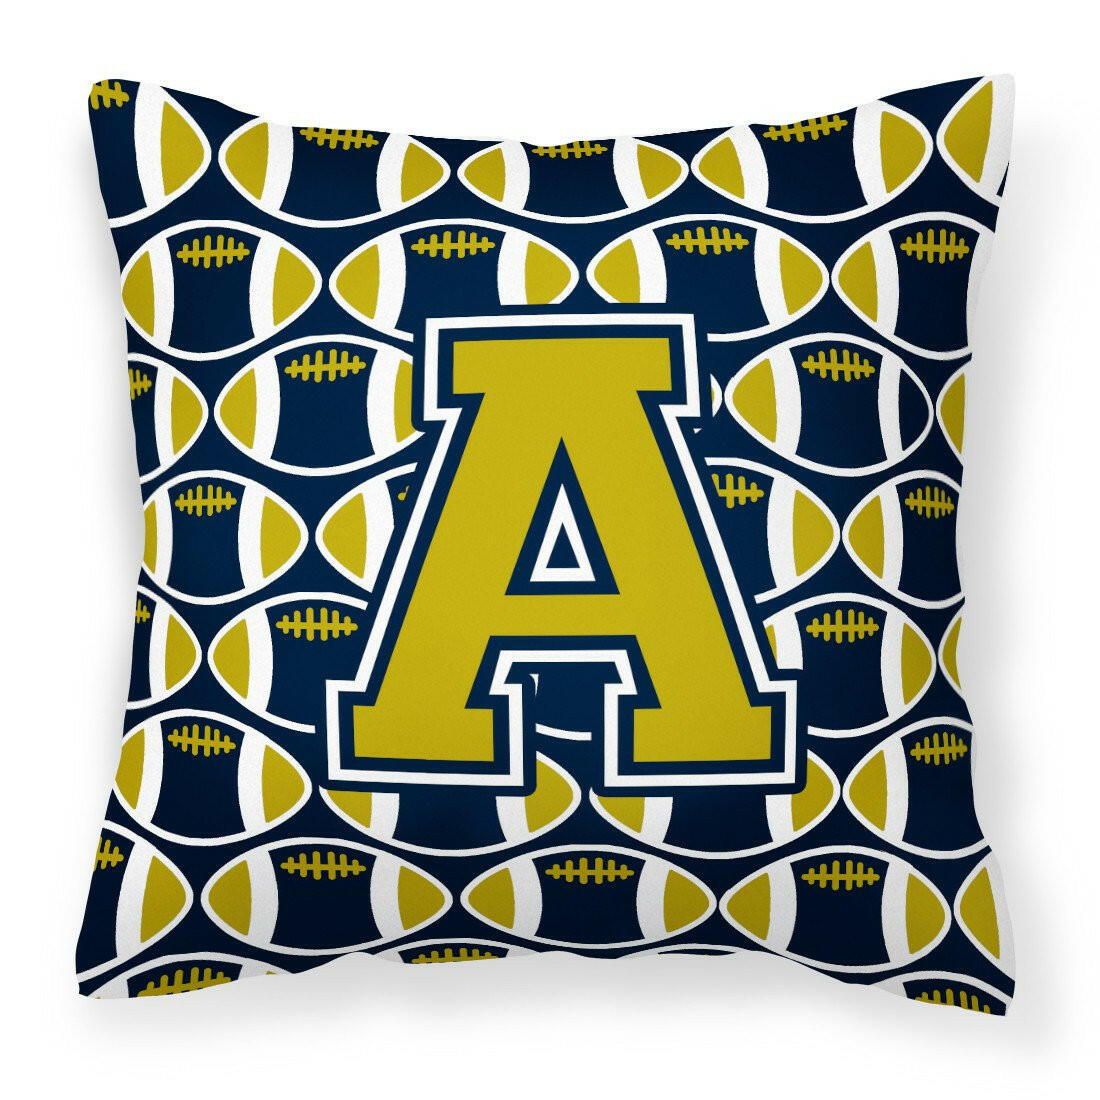 Letter A Football Blue and Gold Fabric Decorative Pillow CJ1074-APW1414 by Caroline's Treasures